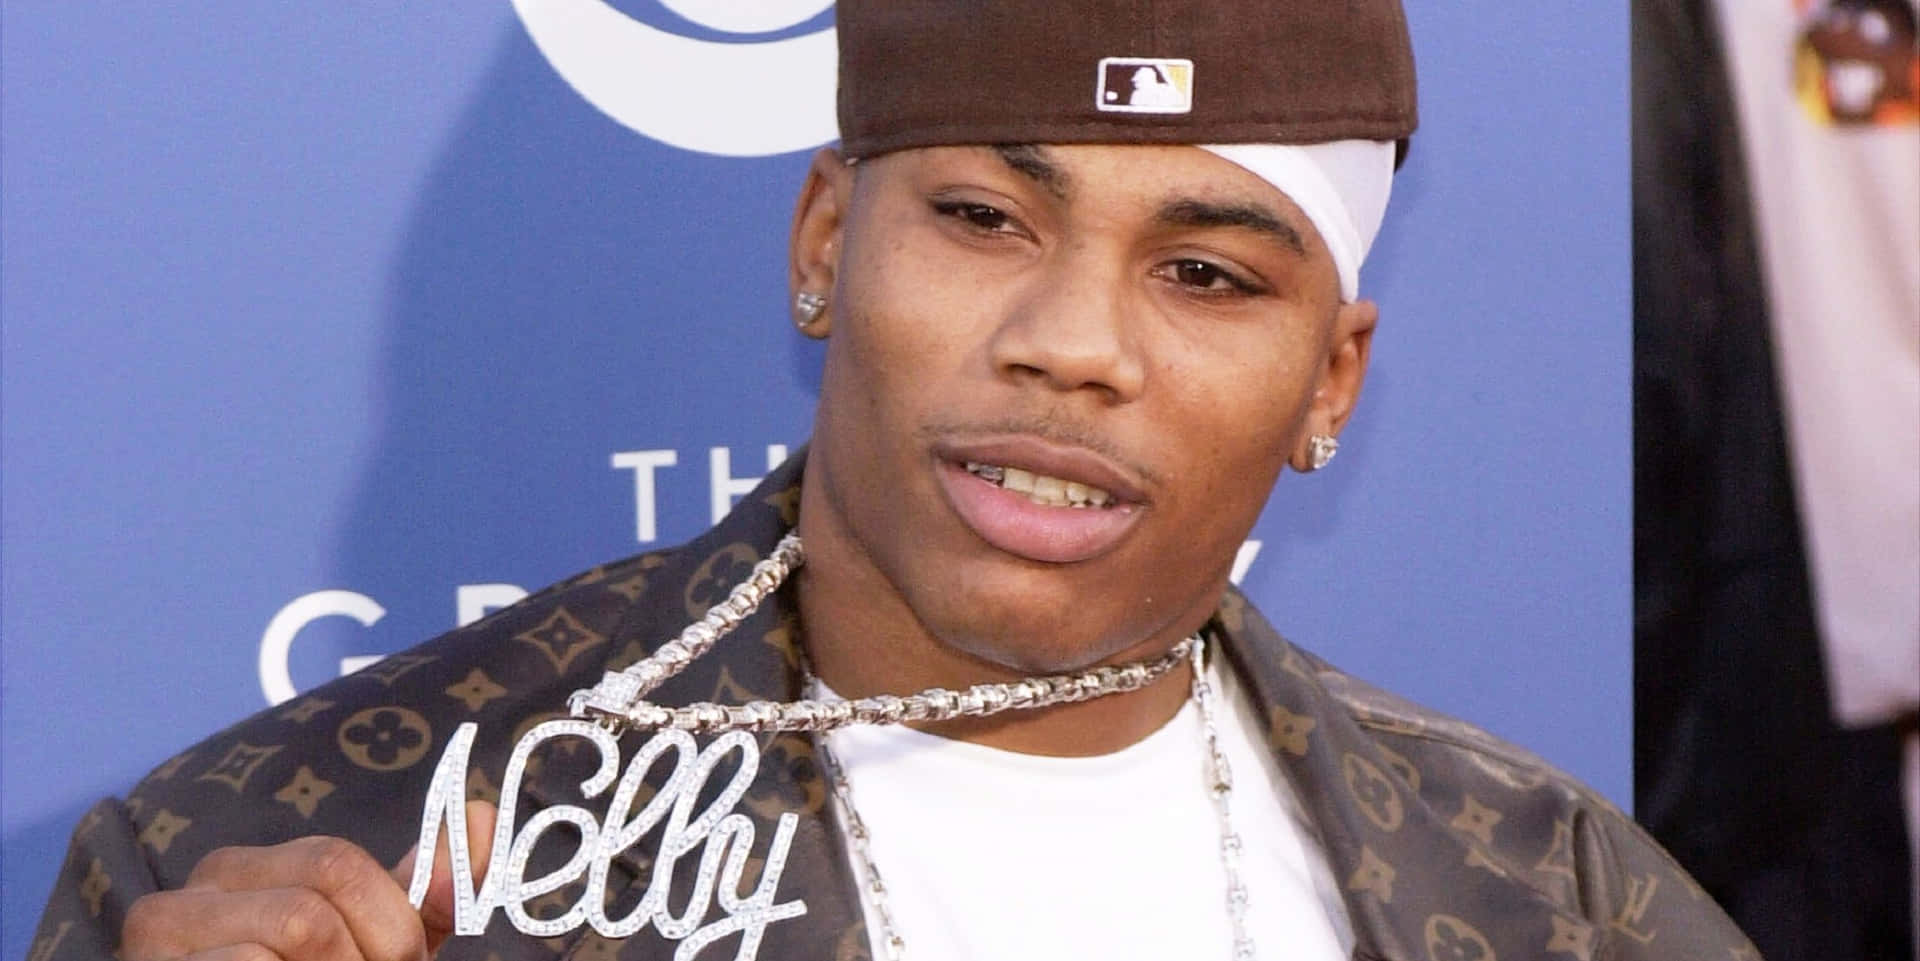 Nelly During The Grammys Award 2003 Wallpaper